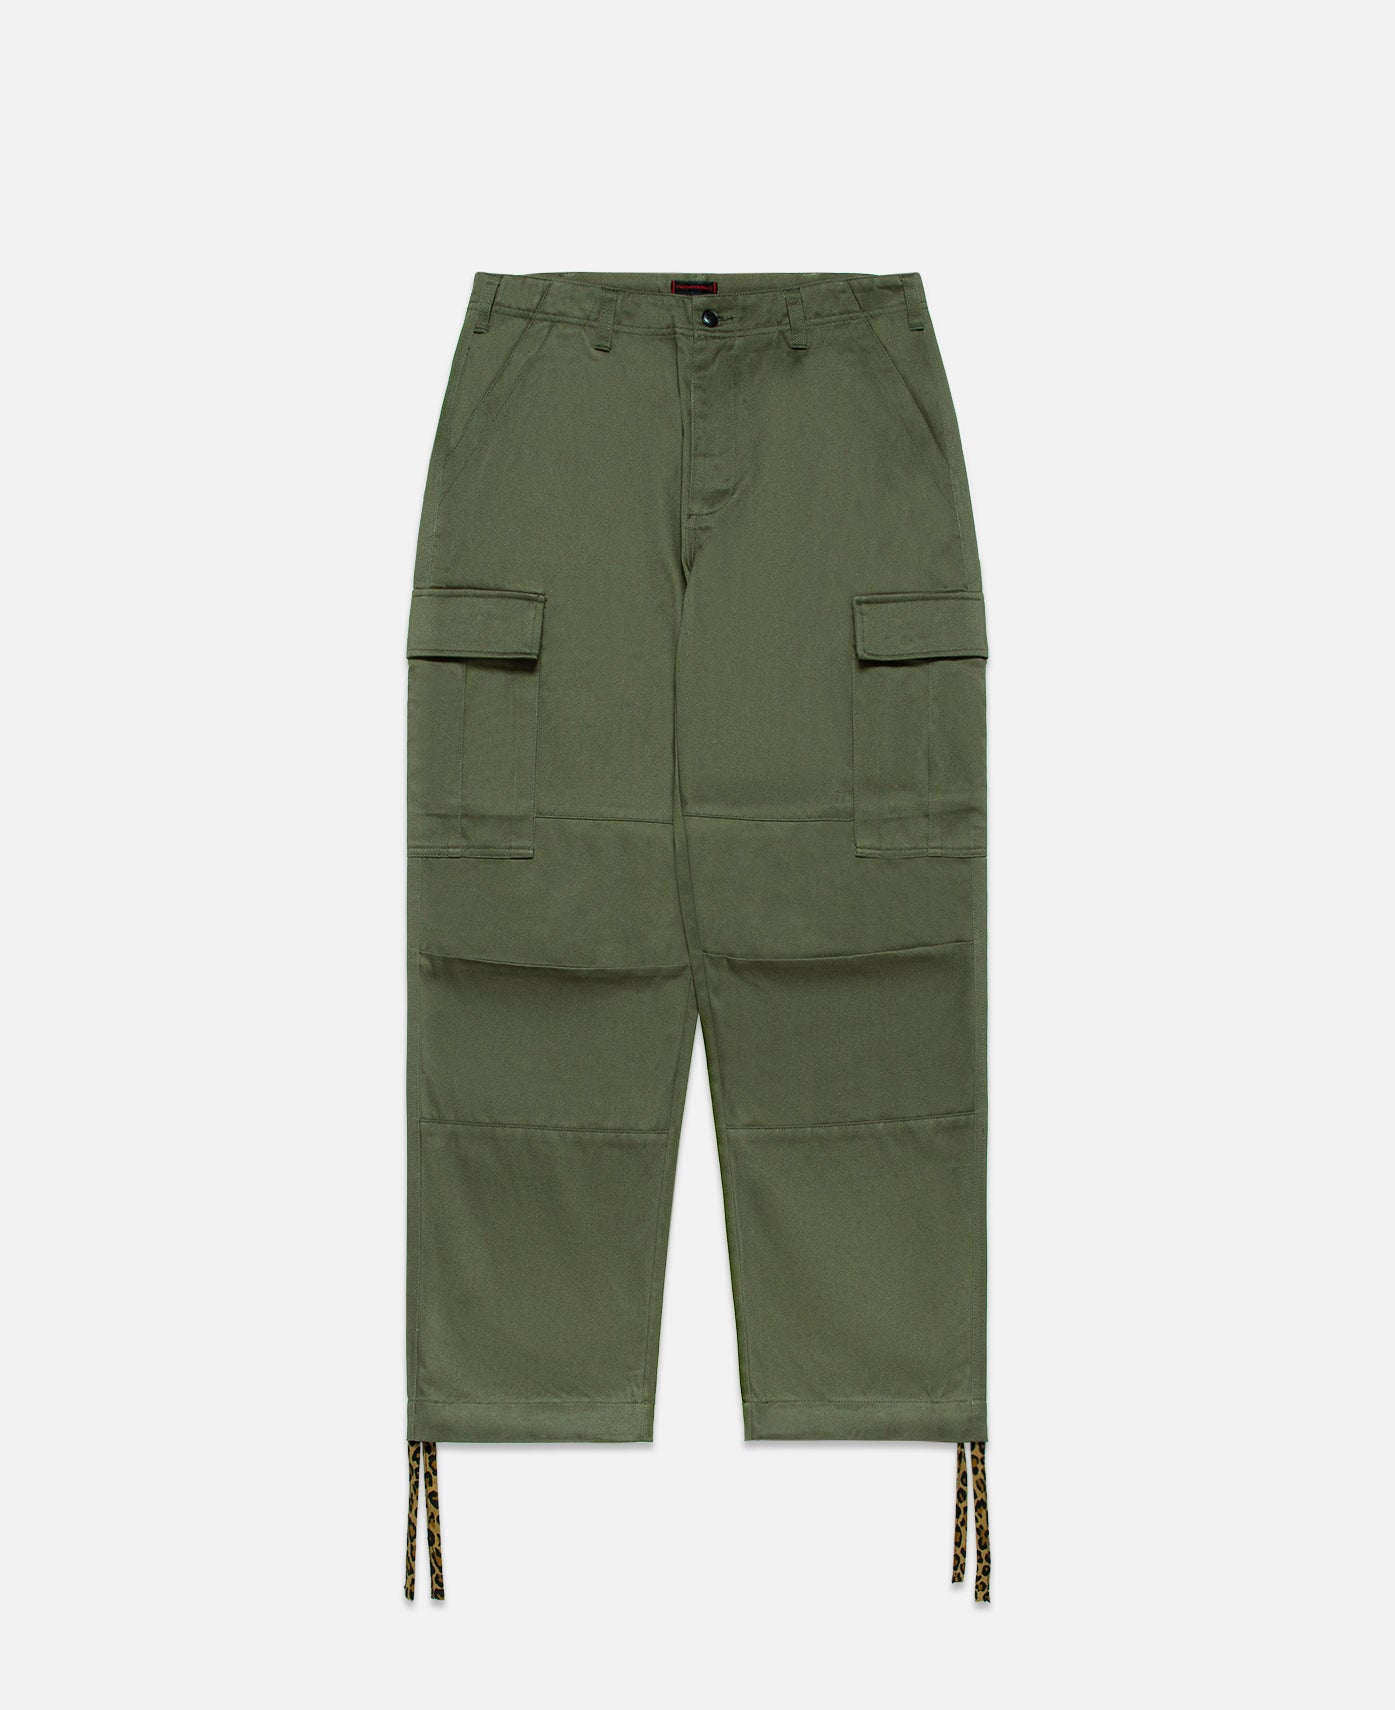 Army Pants (Olive)